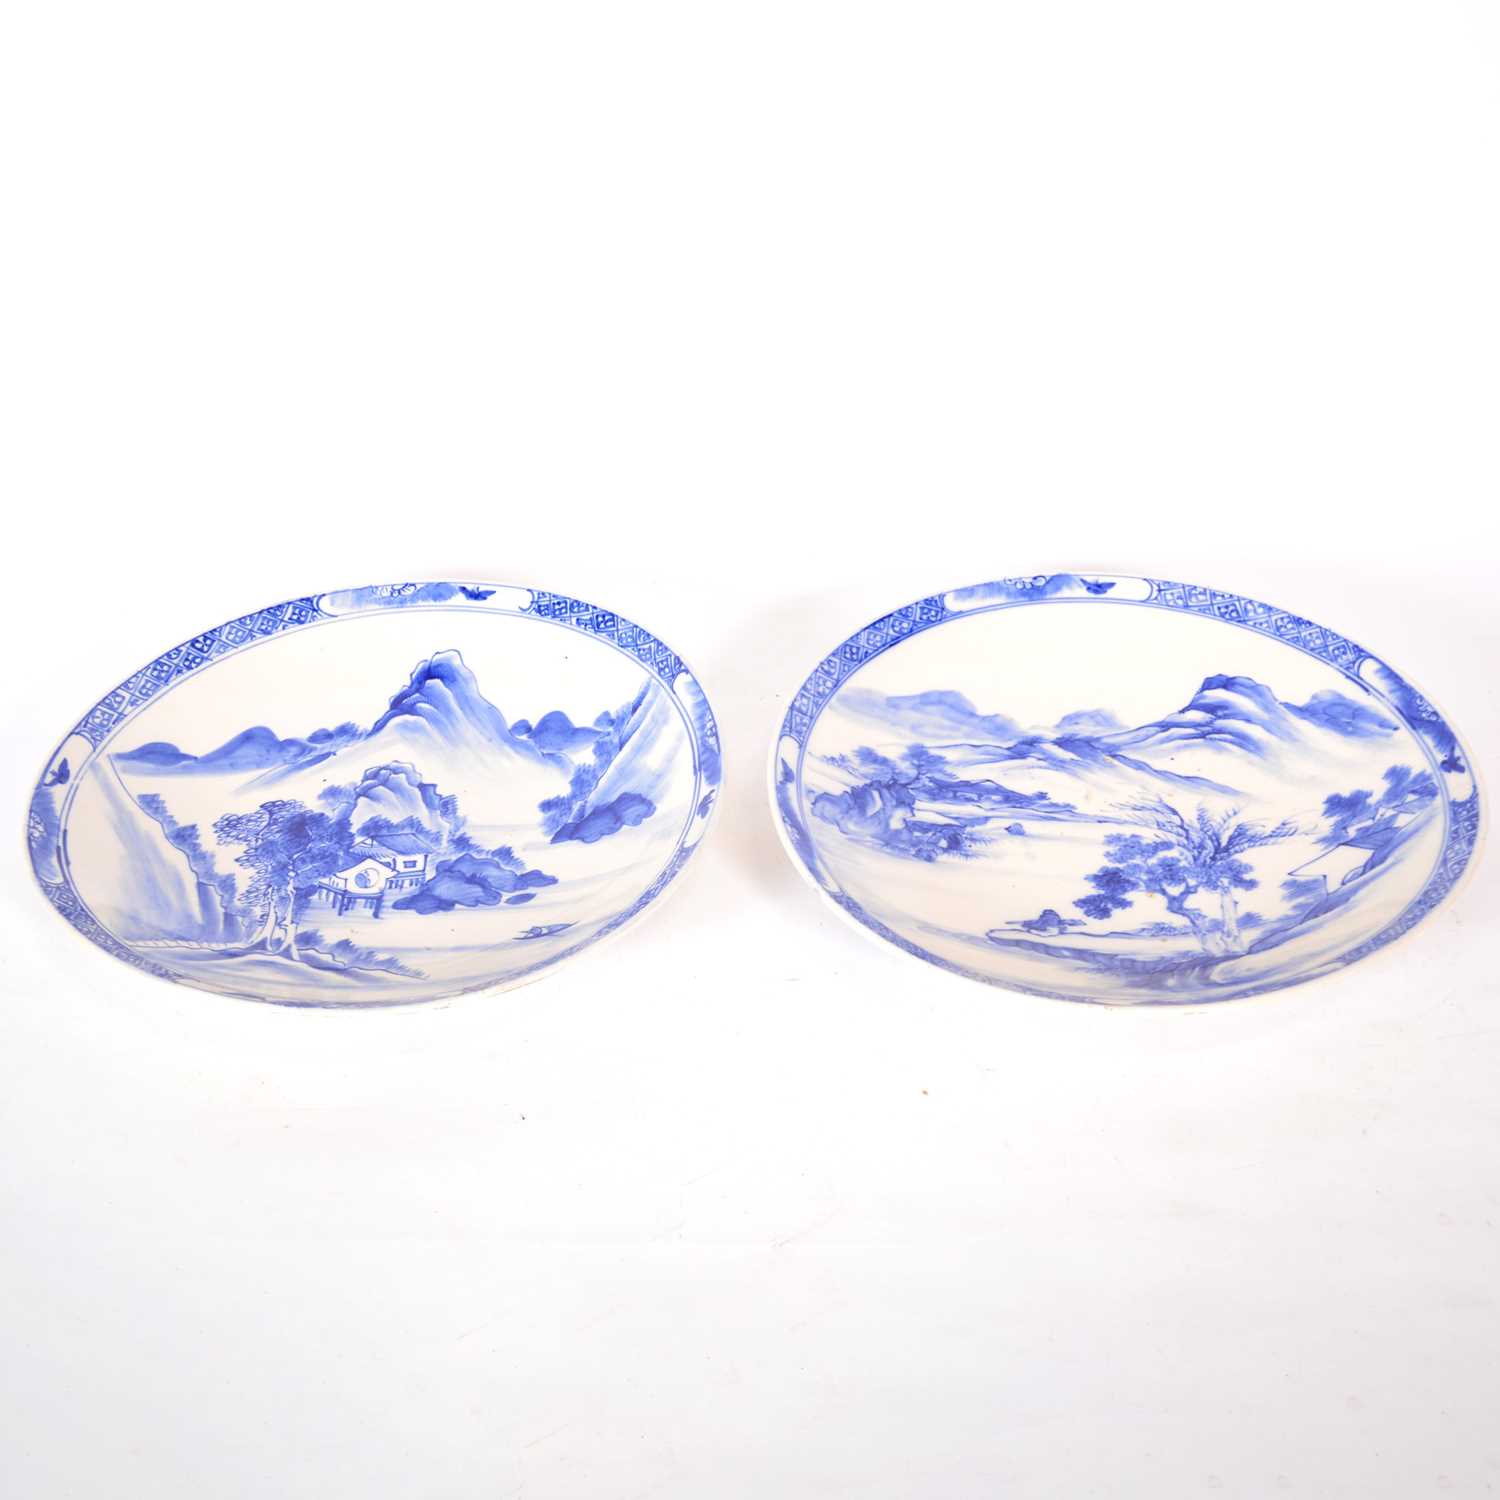 Lot 120 - Pair of early 20th century Japanese blue and white chargers, early 20th century.